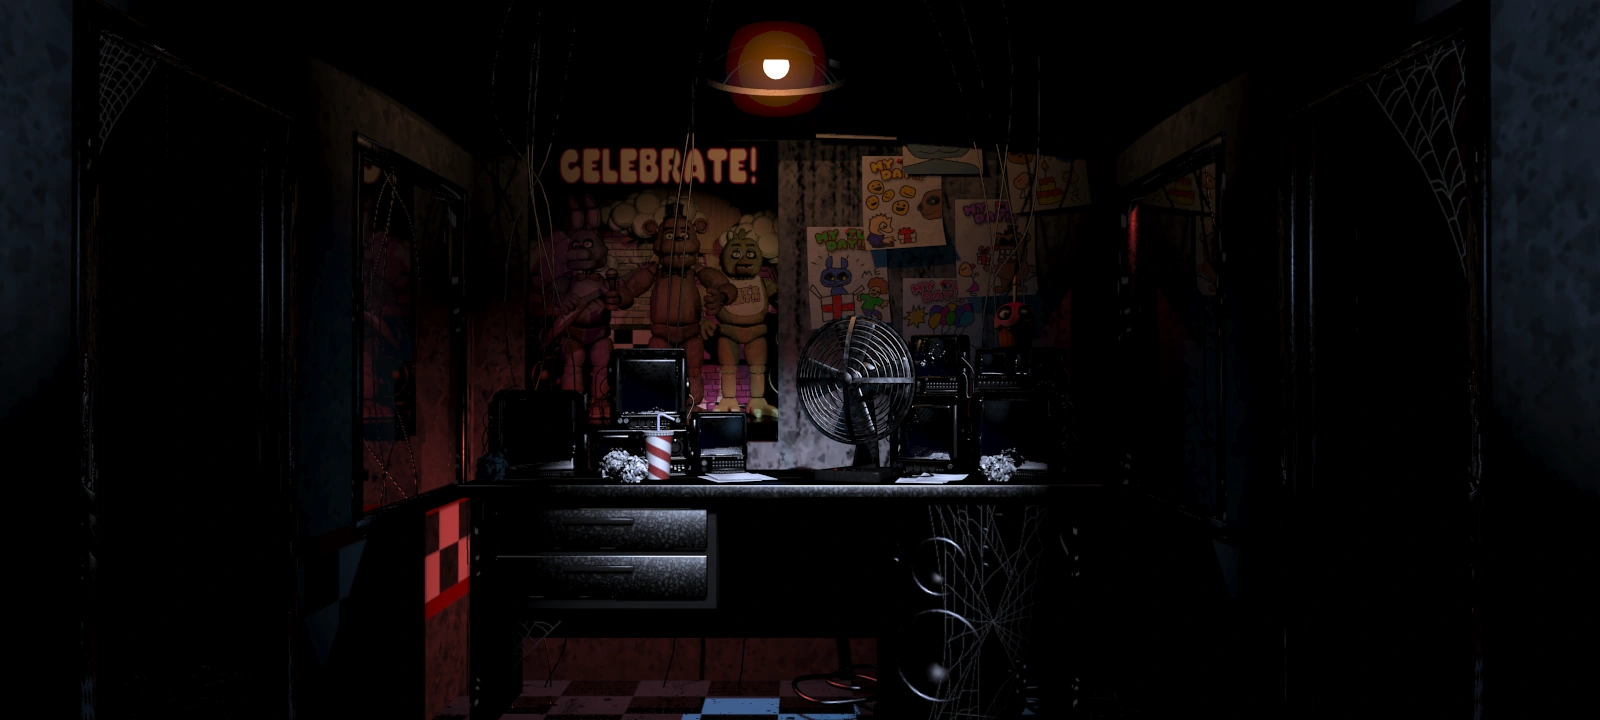 Do You Have Power In Five Nights At Freddy's 1?